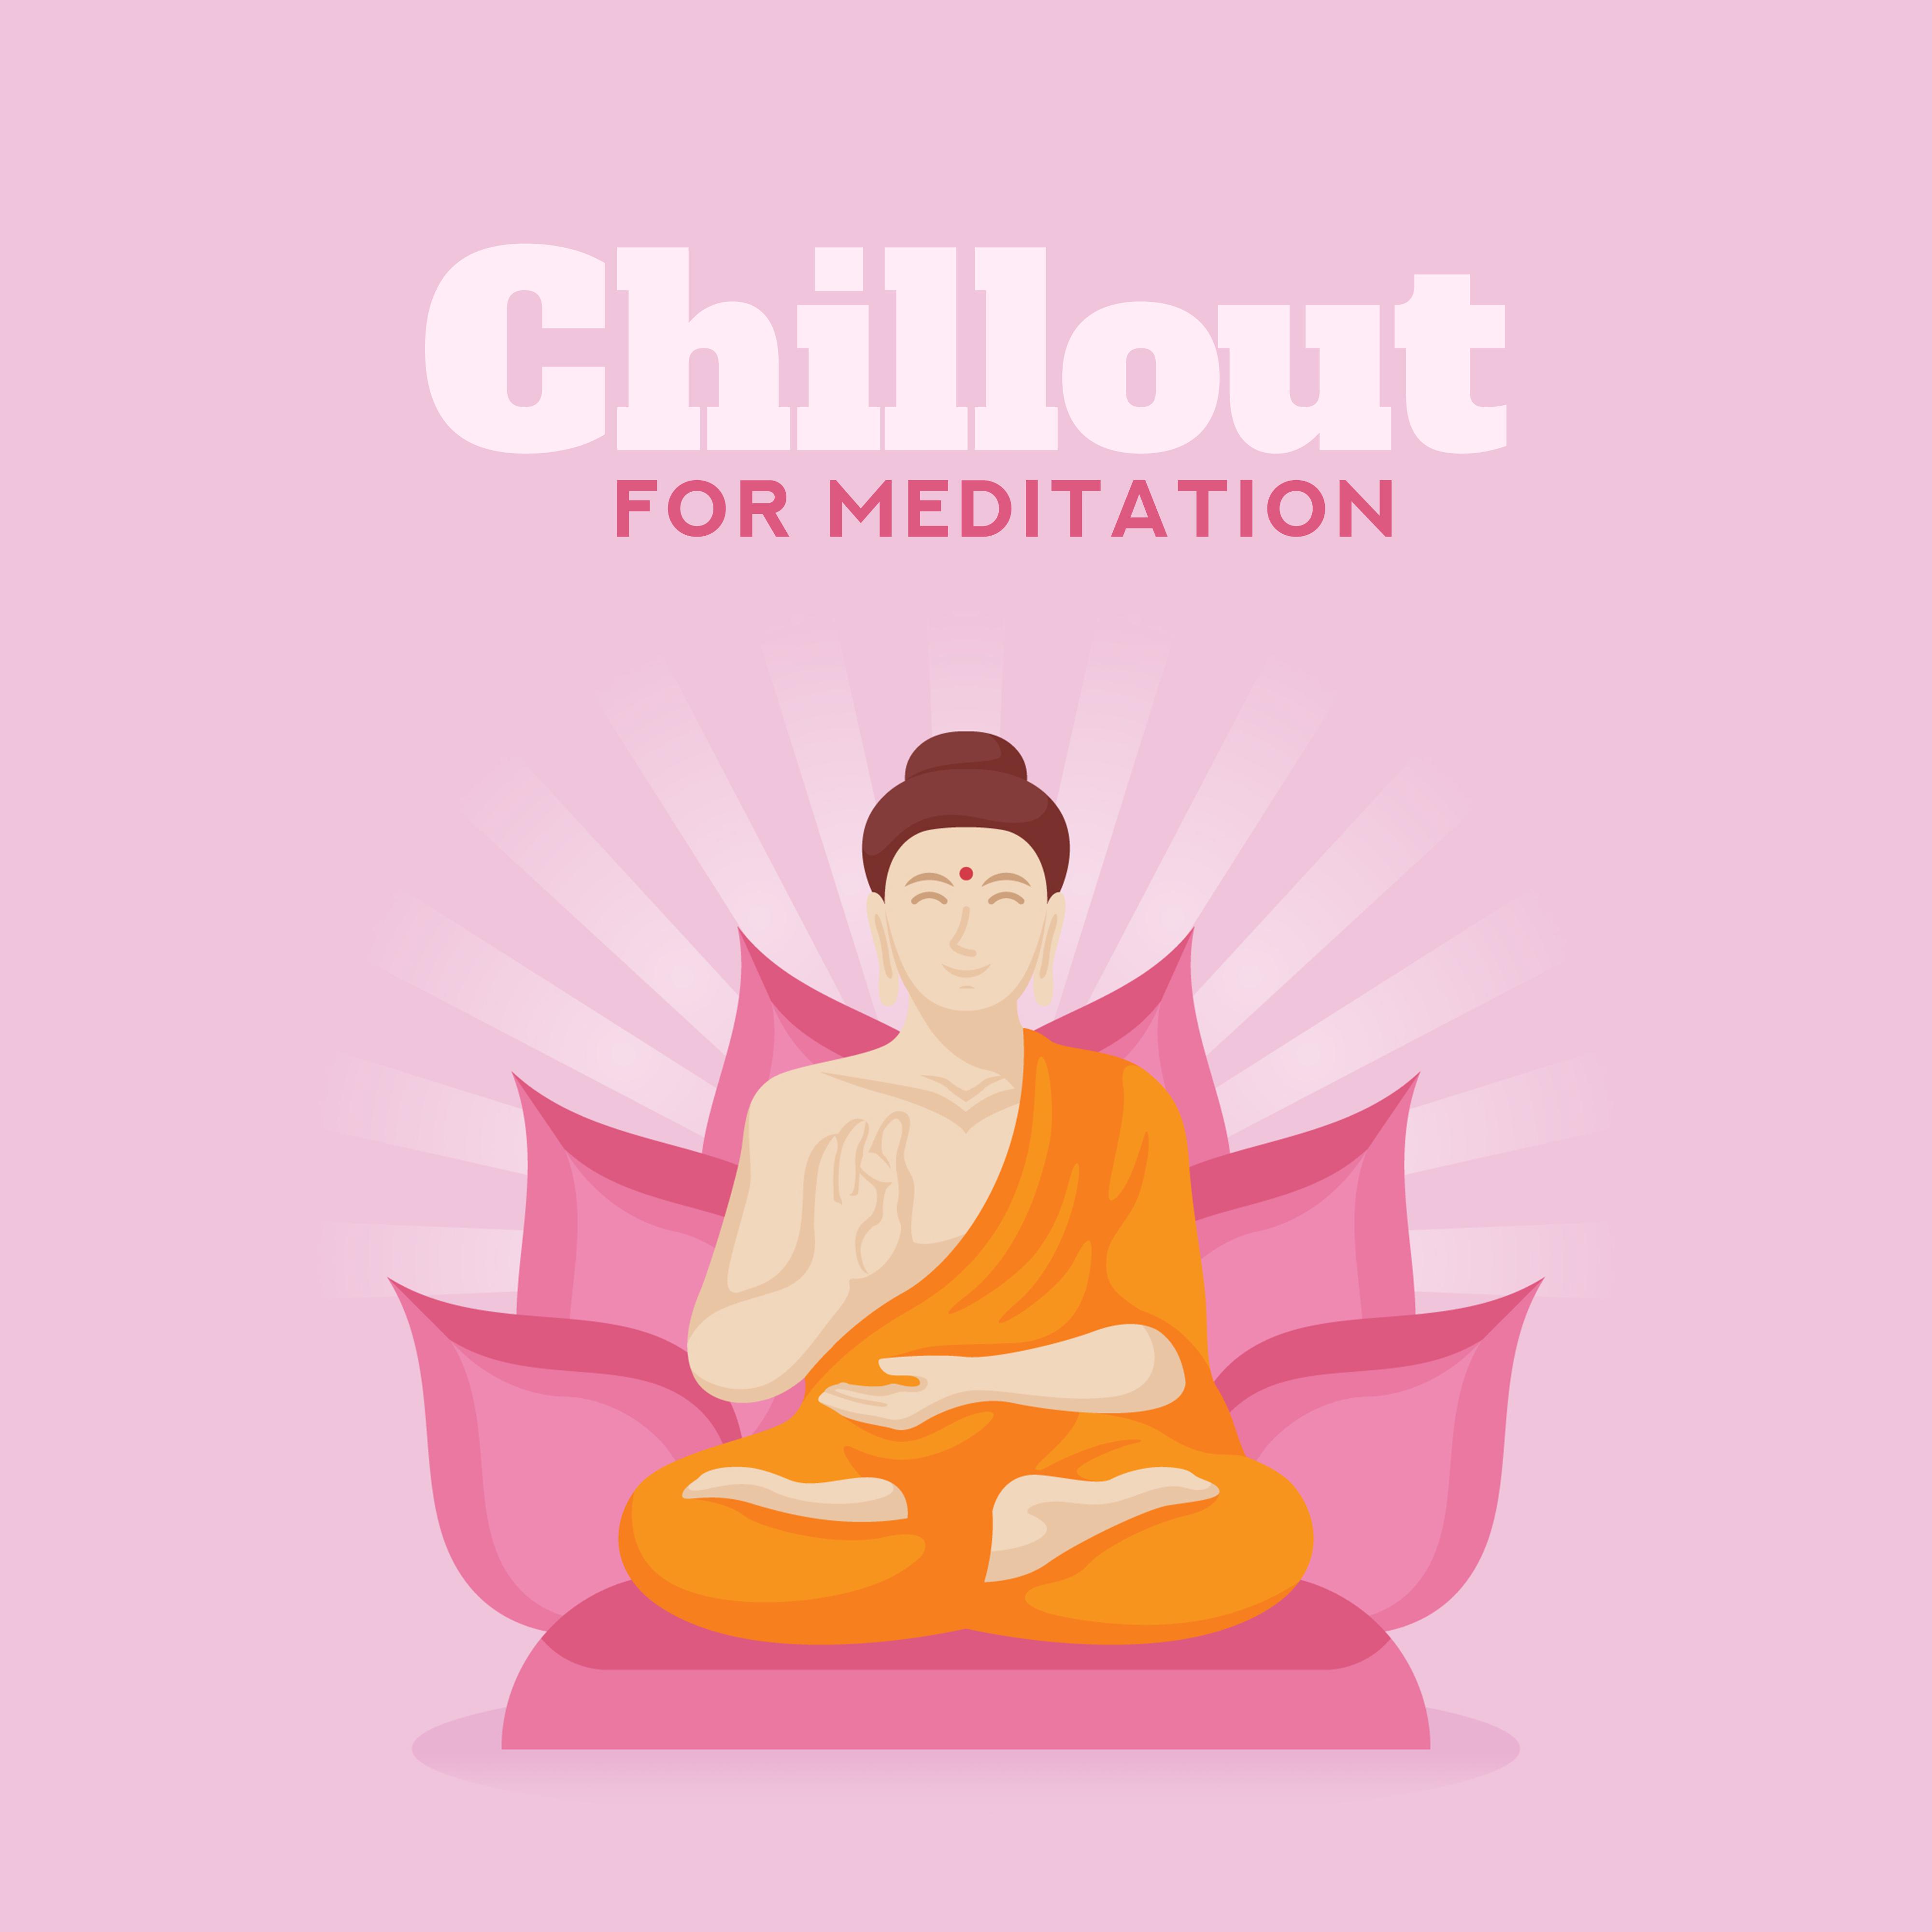 Chillout for Meditation - Ambient Music for Buddhist Meditation on Vacation, during Rest or Spare Time, a Modern Form of Meditation, Contemplation and Relaxation